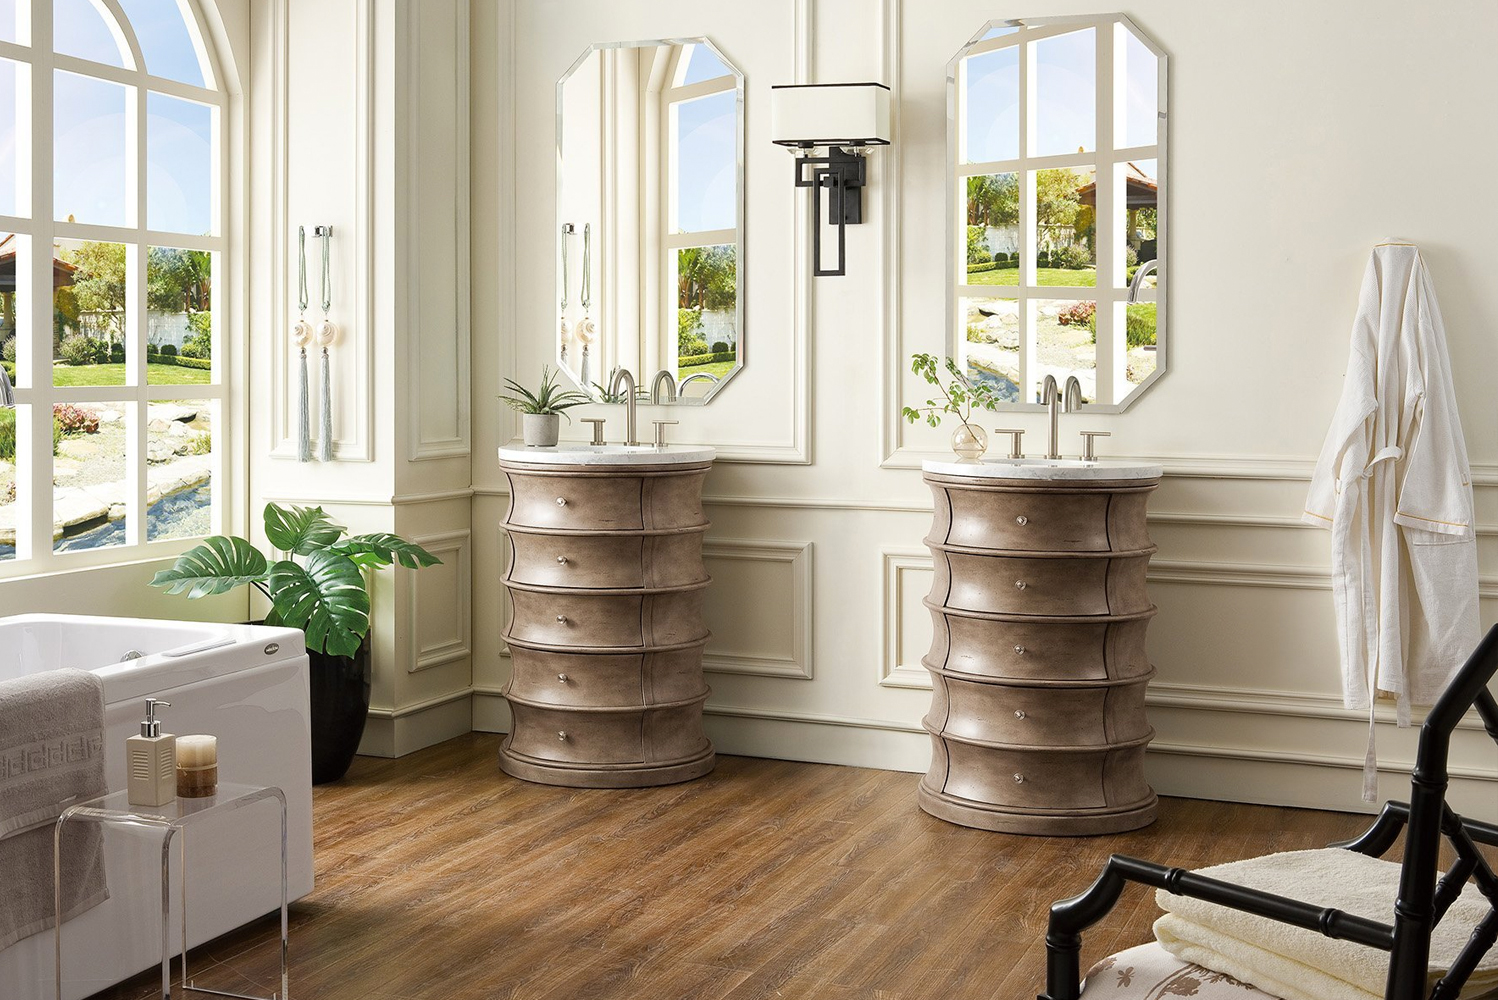 James Martin Furniture manufacturer of bathroom vanity cabinets launched the Cairns vanity 